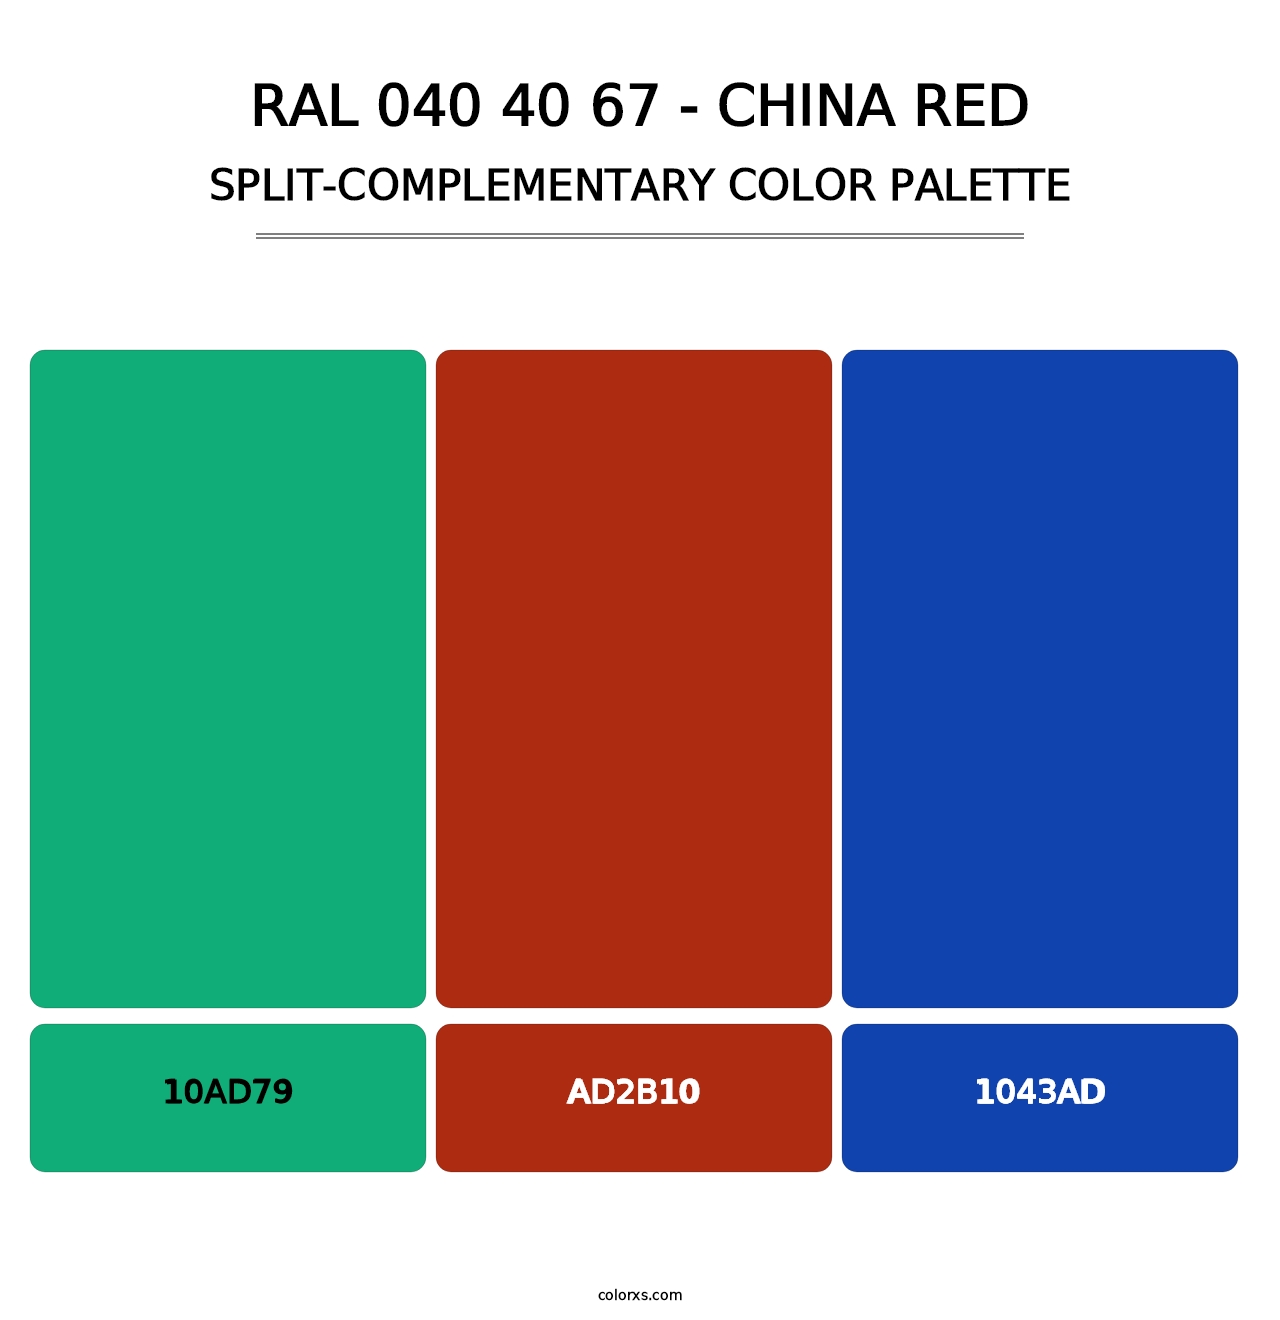 RAL 040 40 67 - China Red - Split-Complementary Color Palette